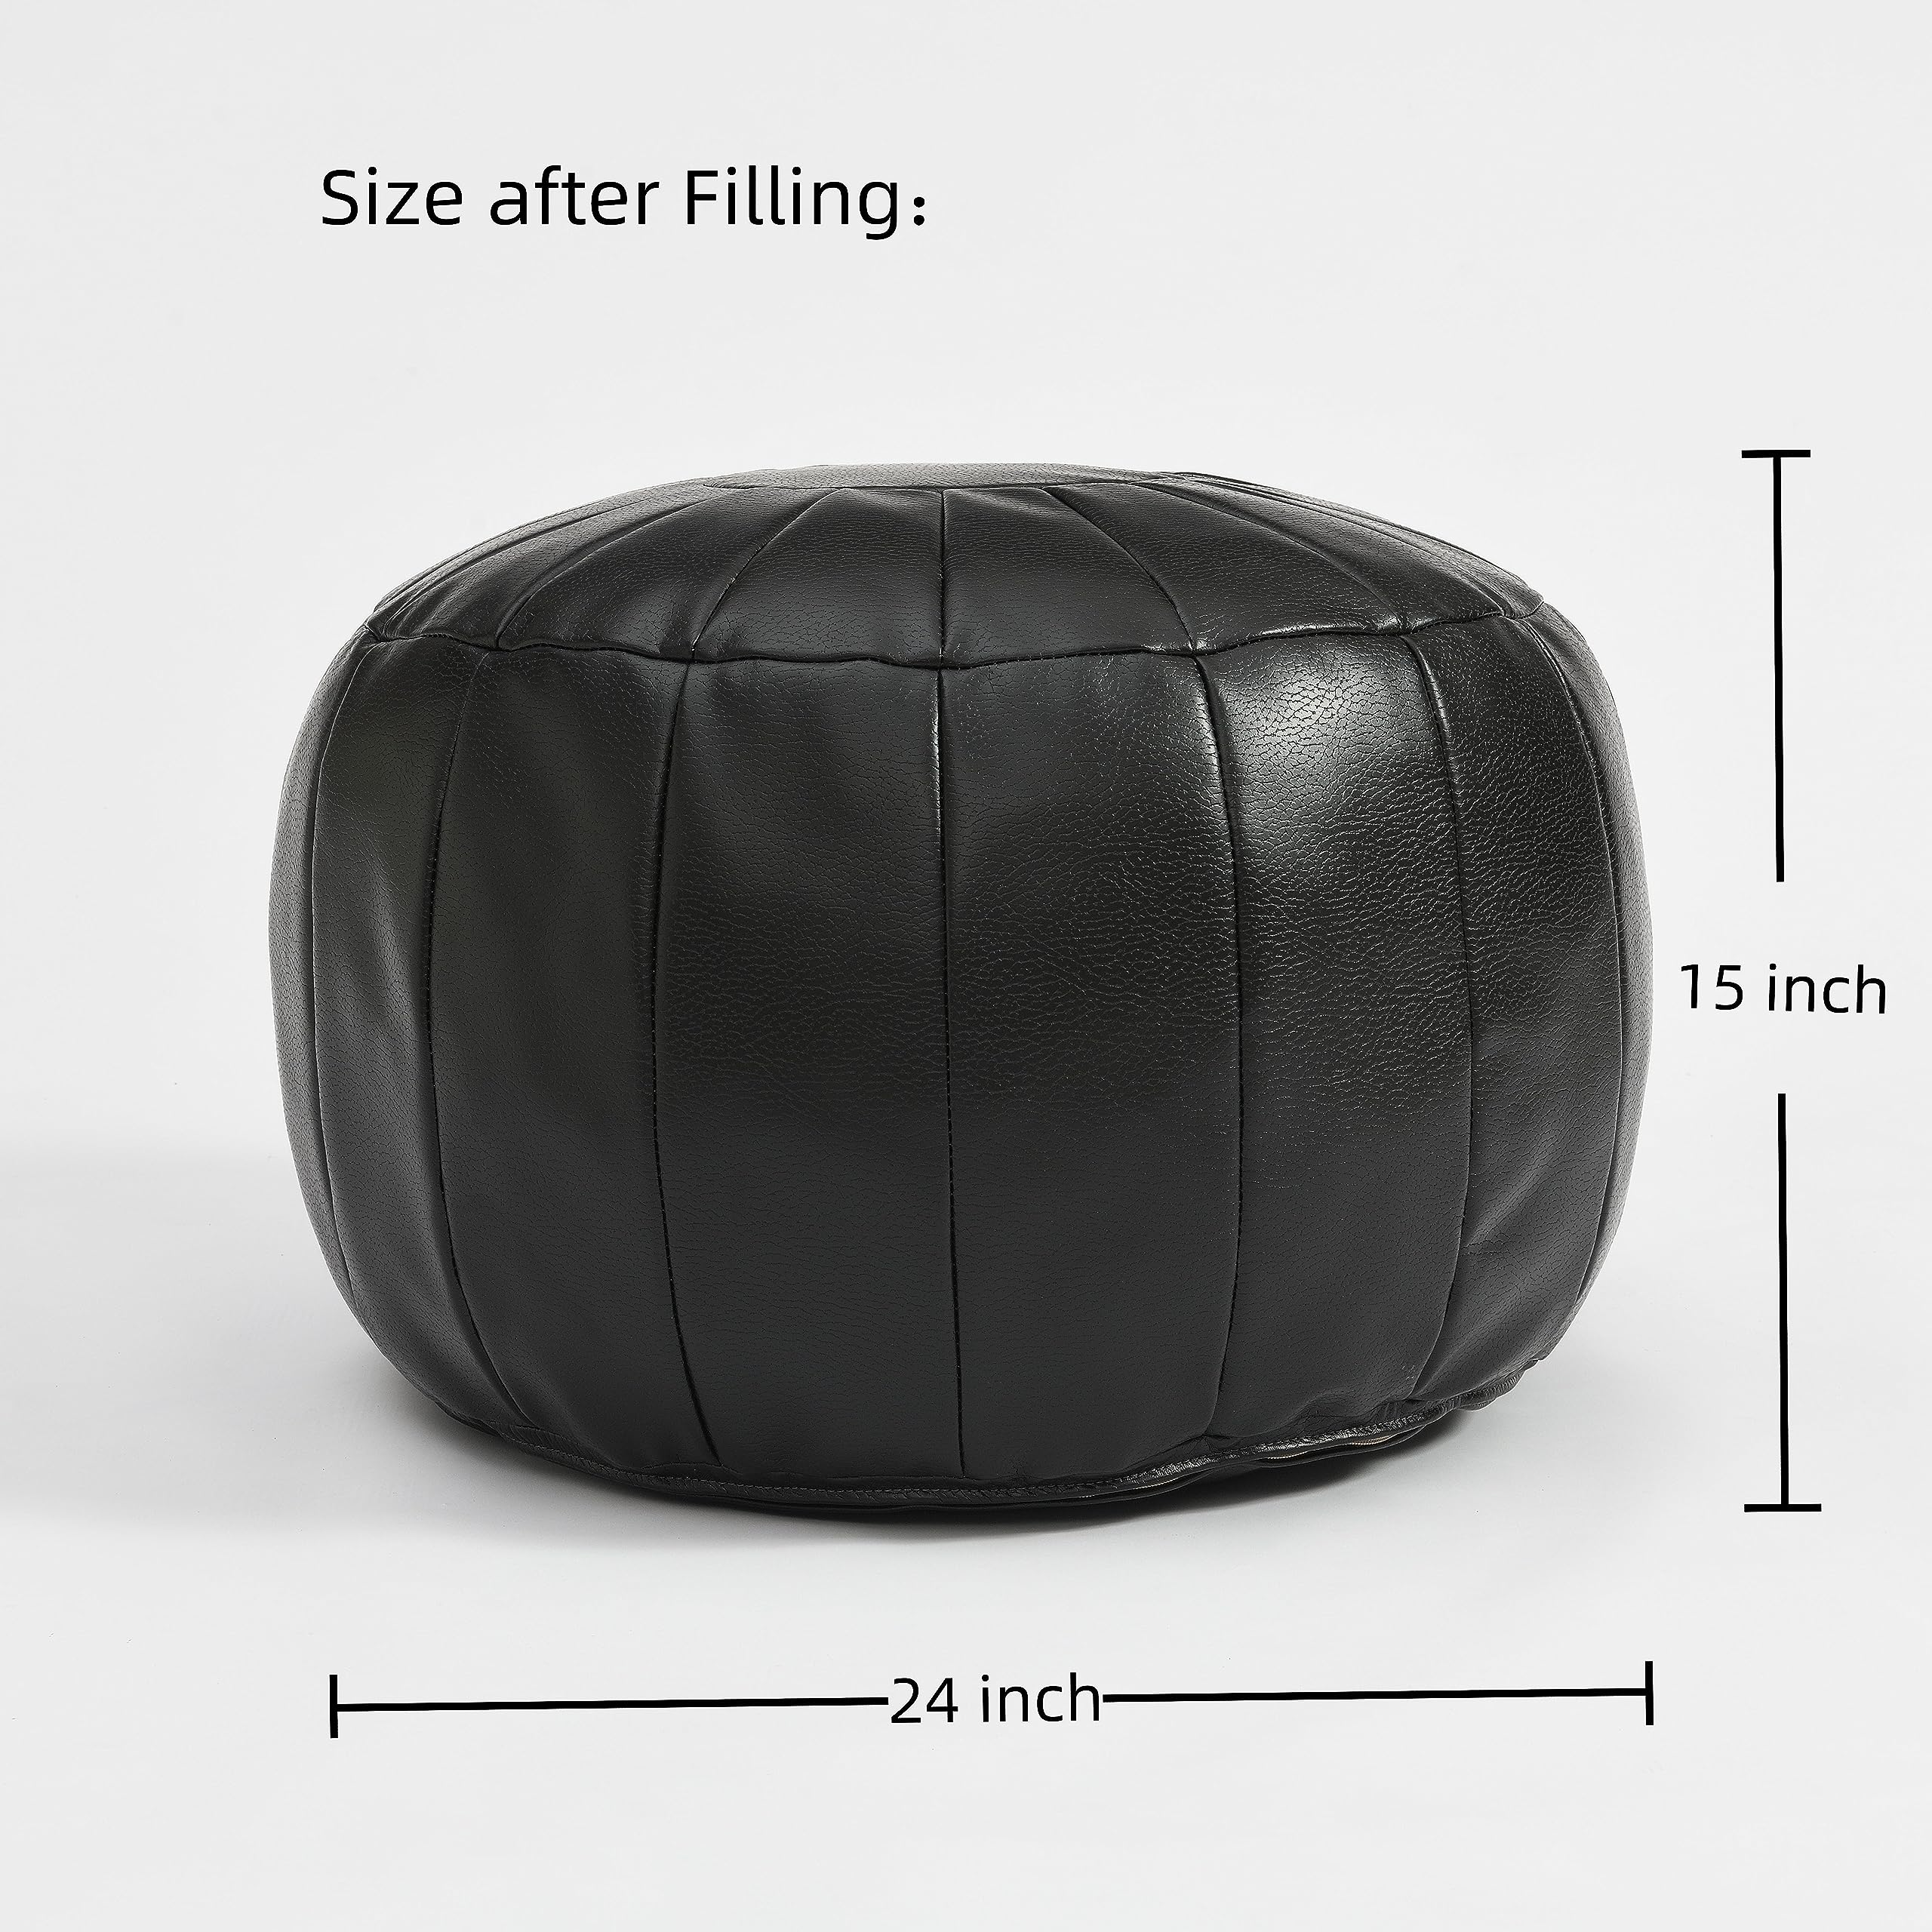 C COMFORTLAND Unstuffed Faux Leather Ottoman Pouf, Round Foot Rest Poof Ottomans, Floor Foot Stool Poufs, Bean Bag Cover with Storage for Living Room, Bedroom, Brown Black (No Filler)